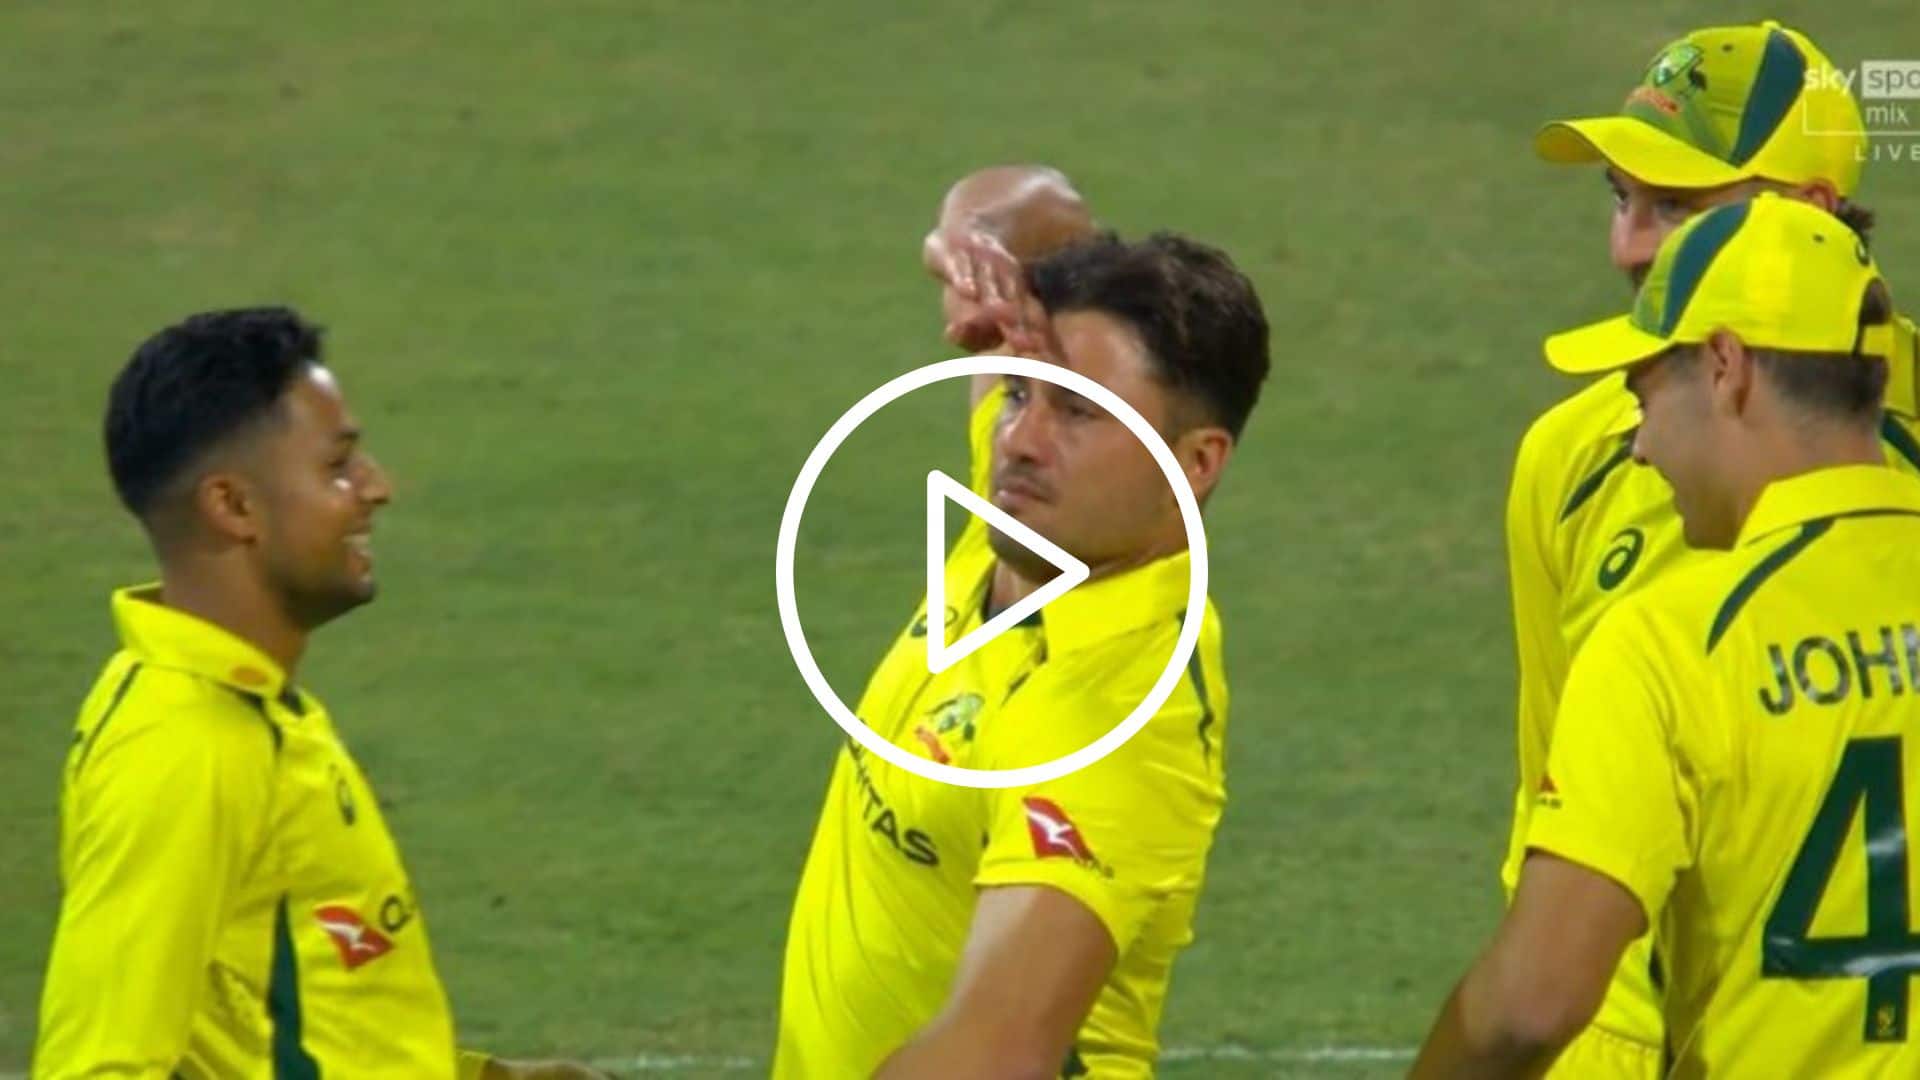 [Watch] Marcus Stoinis' Angry Revenge on South Africans After A Deadly Delivery